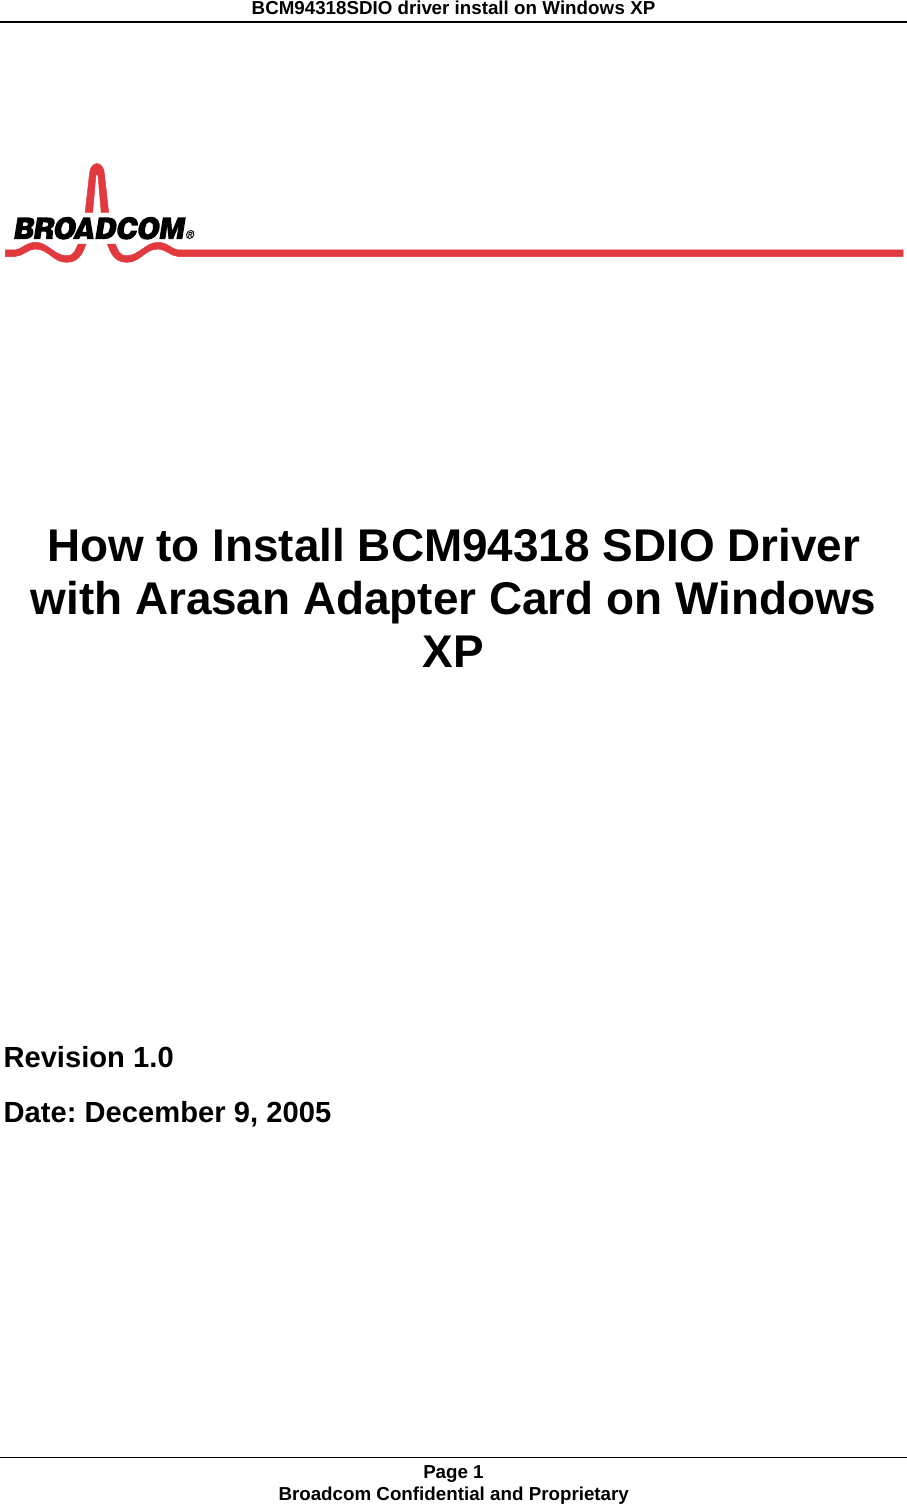 BCM94318SDIO driver install on Windows XP    How to Install BCM94318 SDIO Driver with Arasan Adapter Card on Windows XP   Revision 1.0 Date: December 9, 2005         Page 1 Broadcom Confidential and Proprietary  